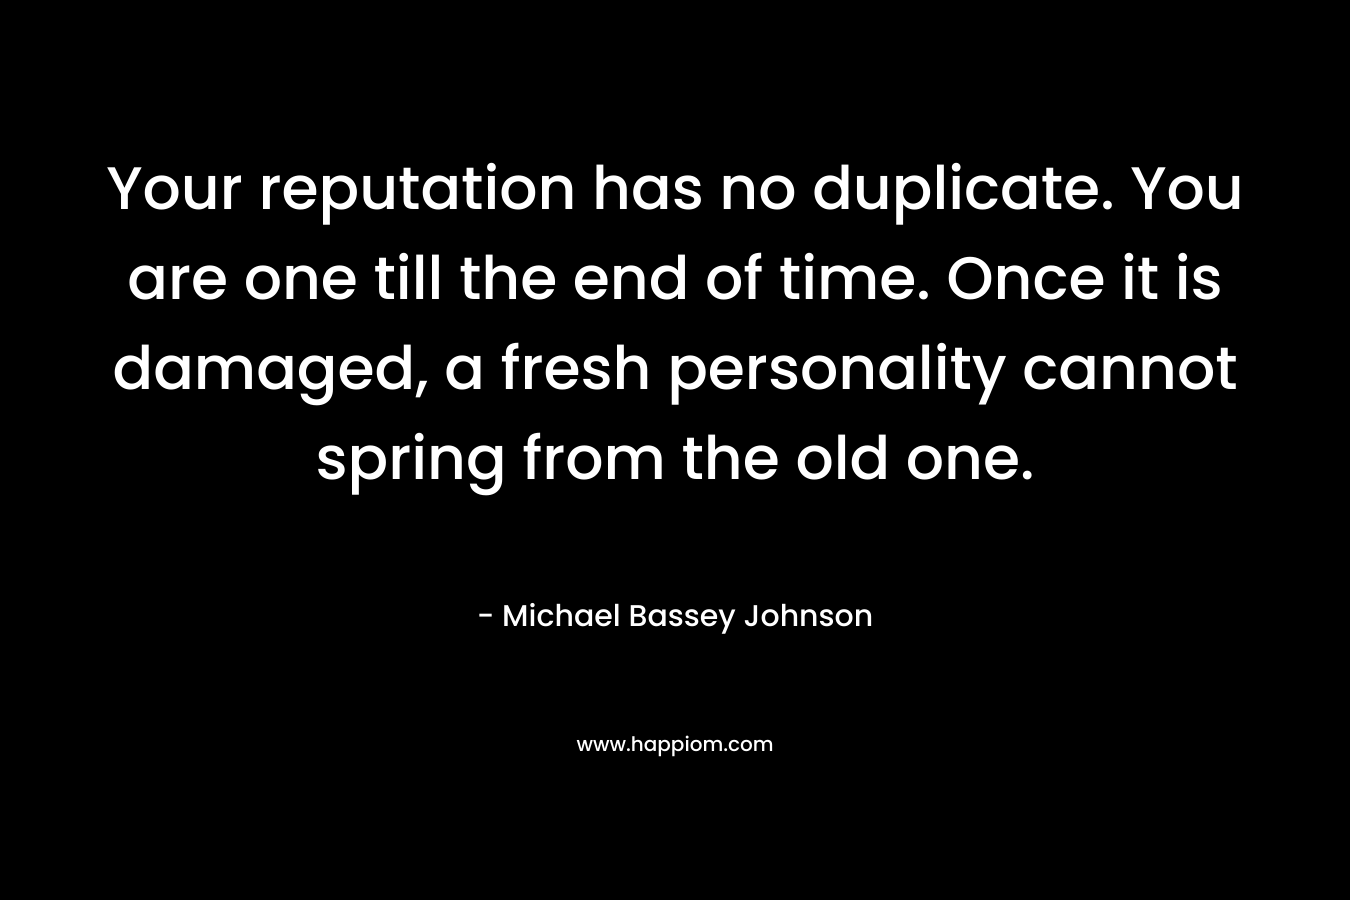 Your reputation has no duplicate. You are one till the end of time. Once it is damaged, a fresh personality cannot spring from the old one.